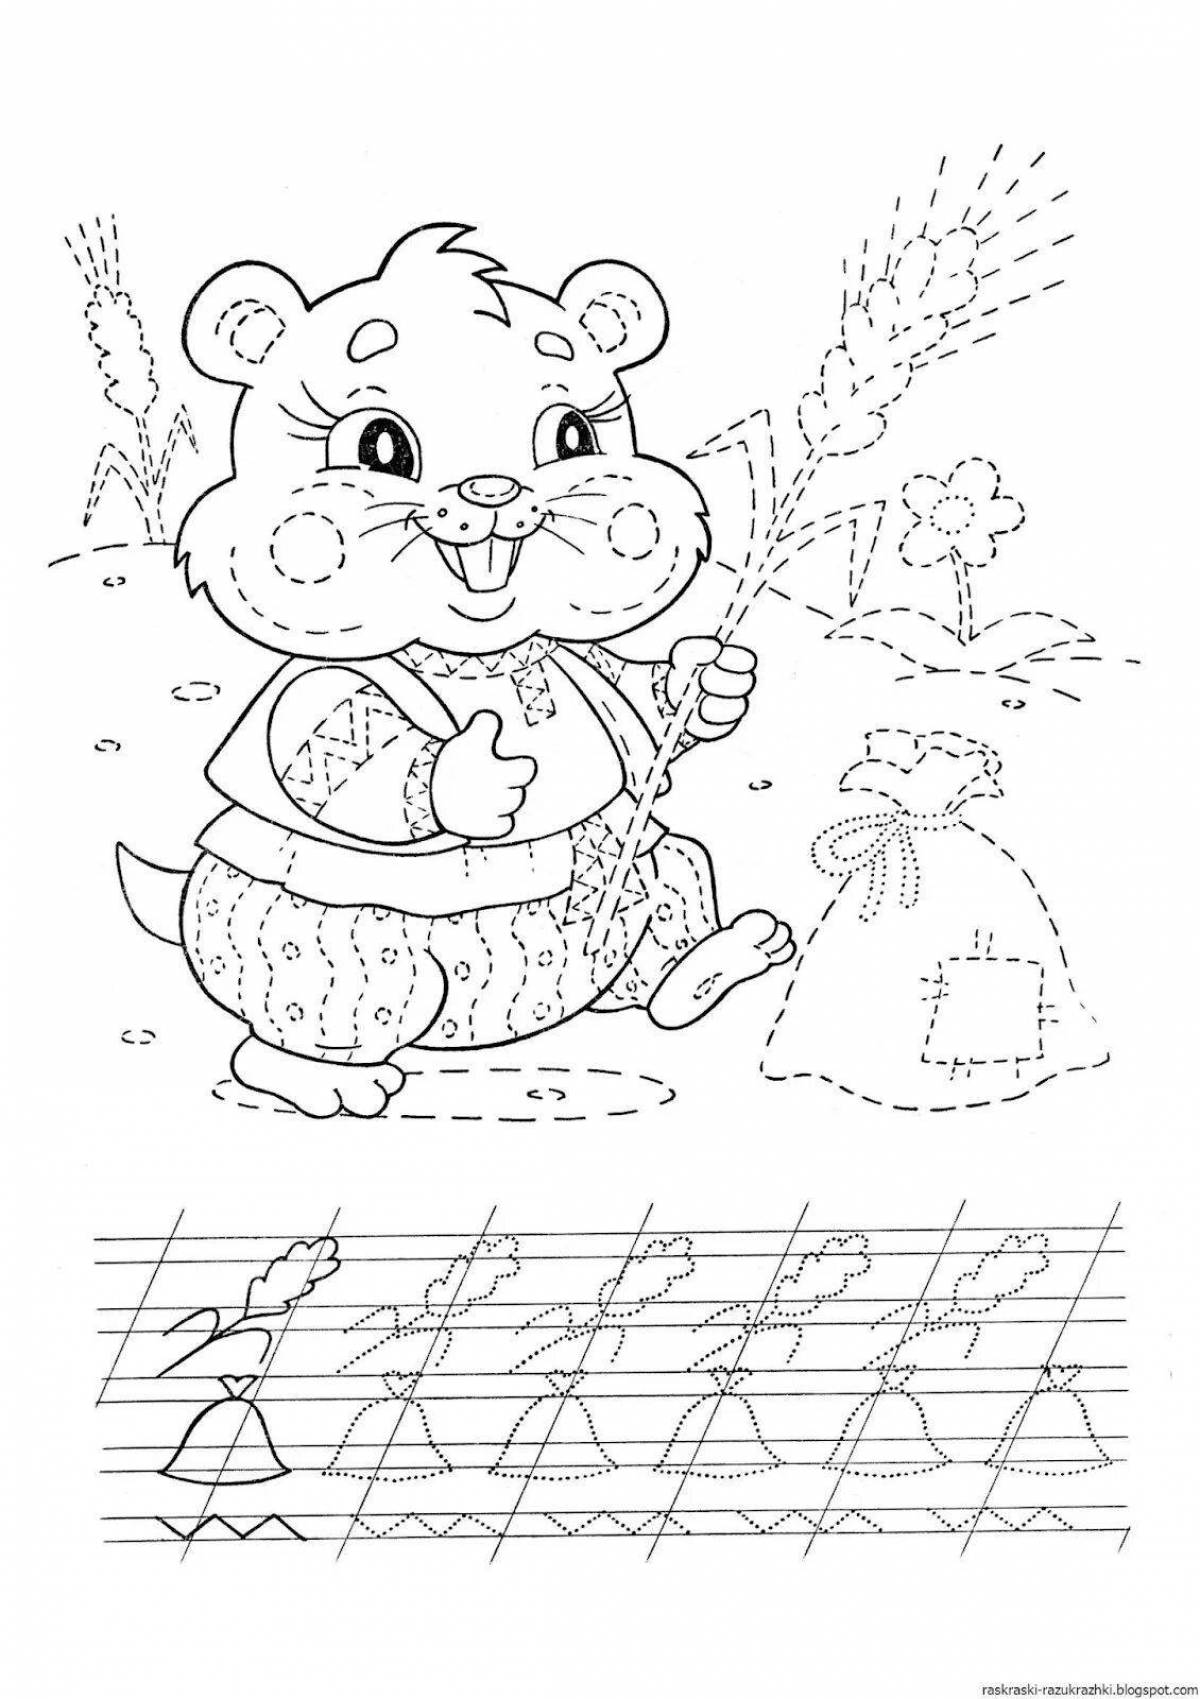 Colorful recipe coloring page for kids